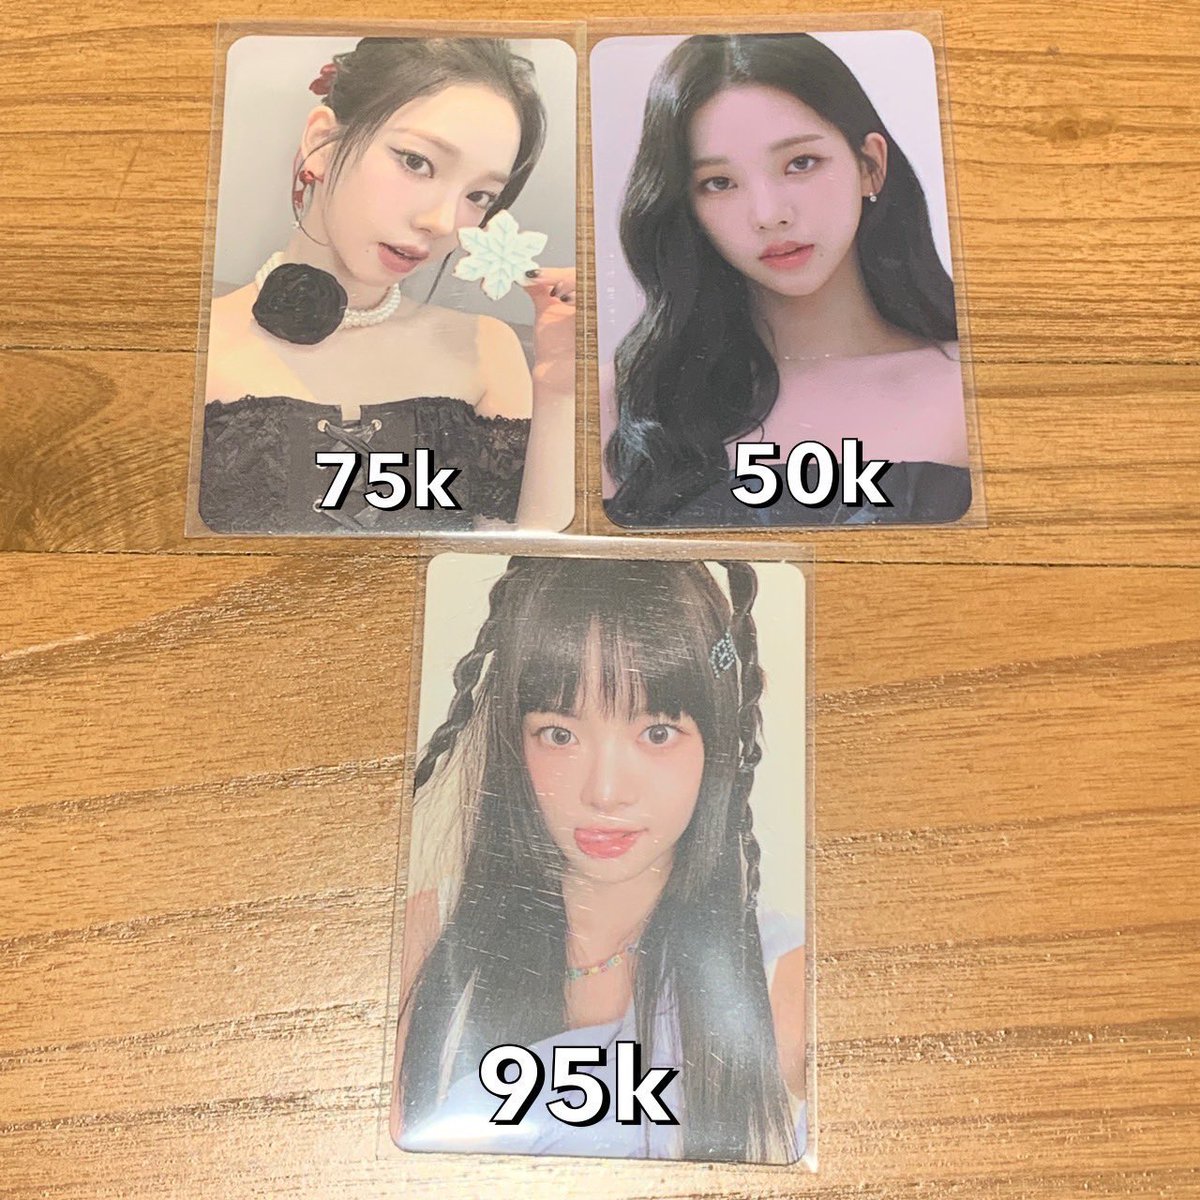 want to sell / wts
aab photocard girlgrup

📍 solo
❌ exc all (min 30k incl pack)
✅ nego & keep=dp
*req 🍊video

t. pc gg girl group aespa giselle winter karina tc week trading card b synk dive savage qq music sg23 chic magazine hoodie girls kwangya ningning drama giant allure